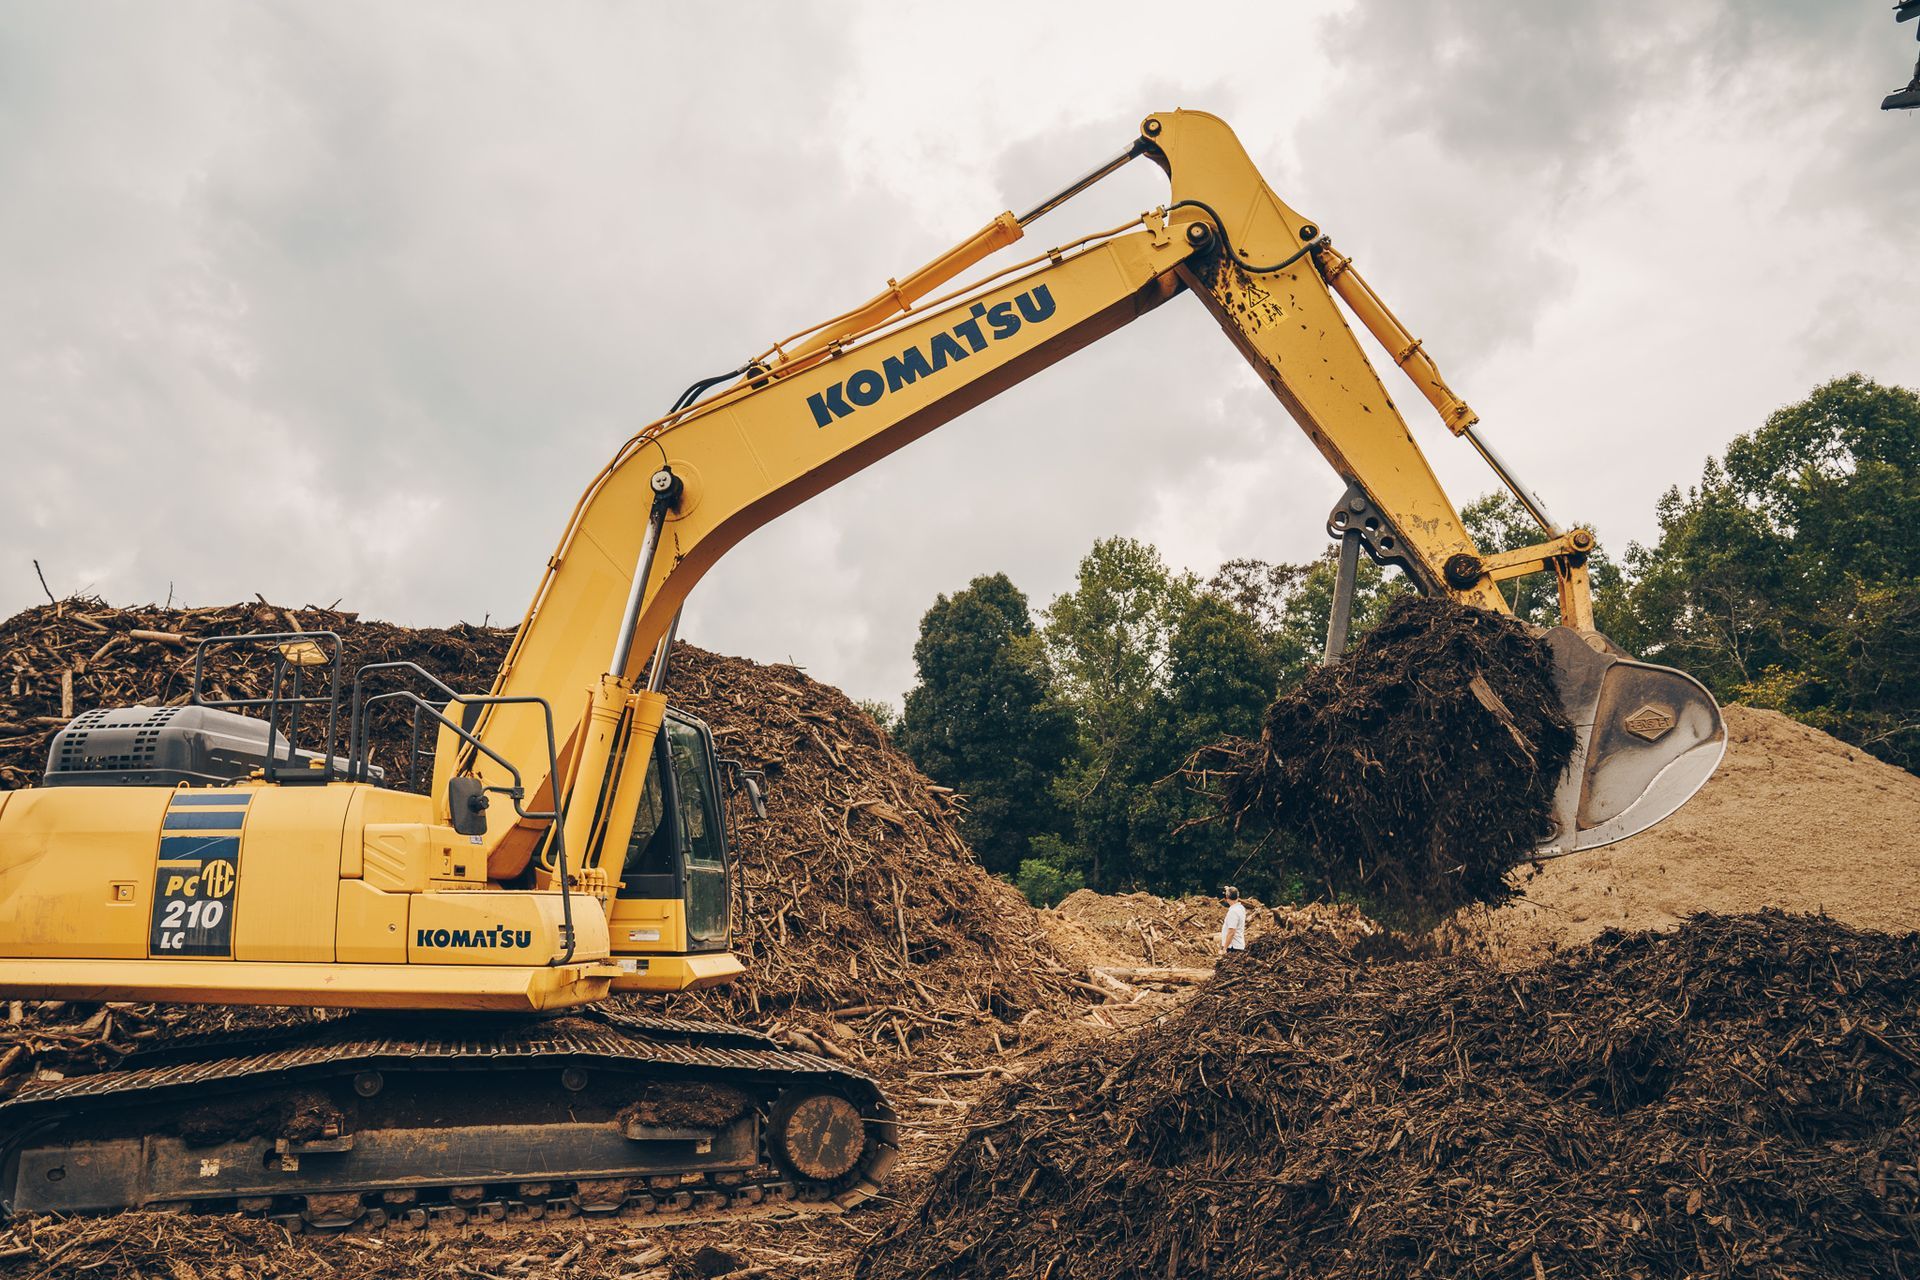 a komatsu excavator is digging in a pile of dirt